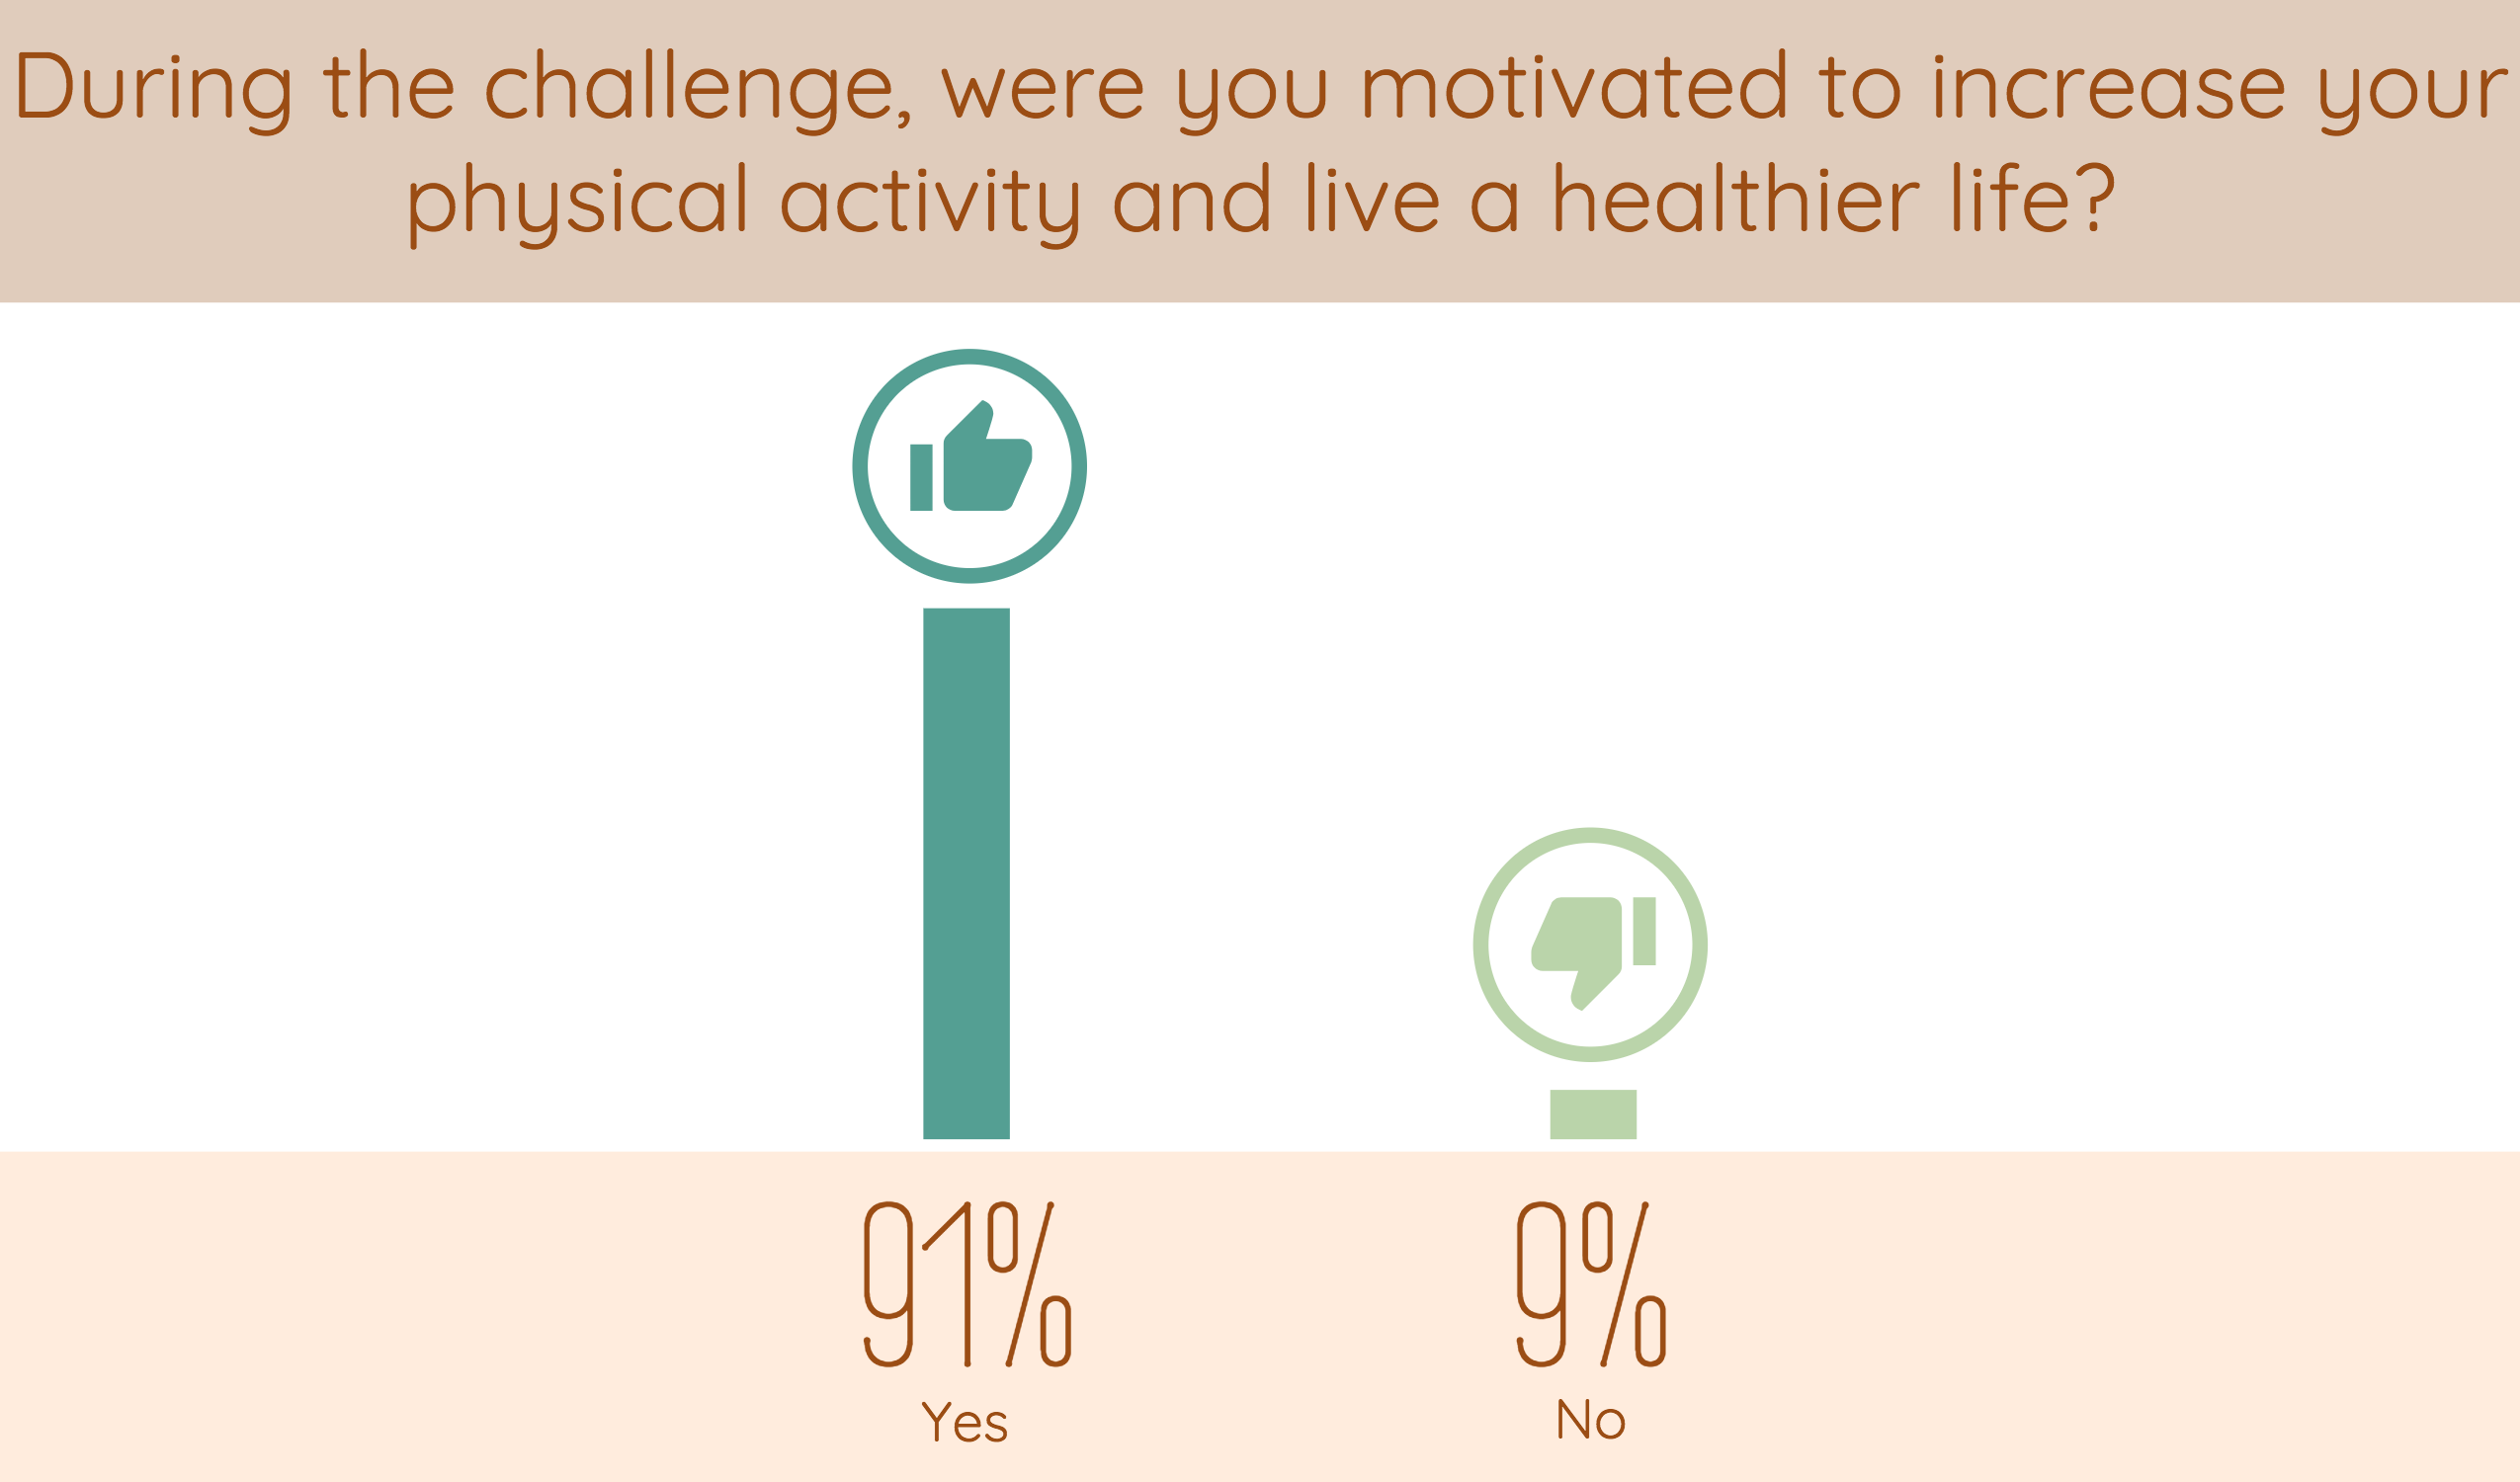 during the wellness challenges, were you motivated to increase your physical activity and live a healthier life? 